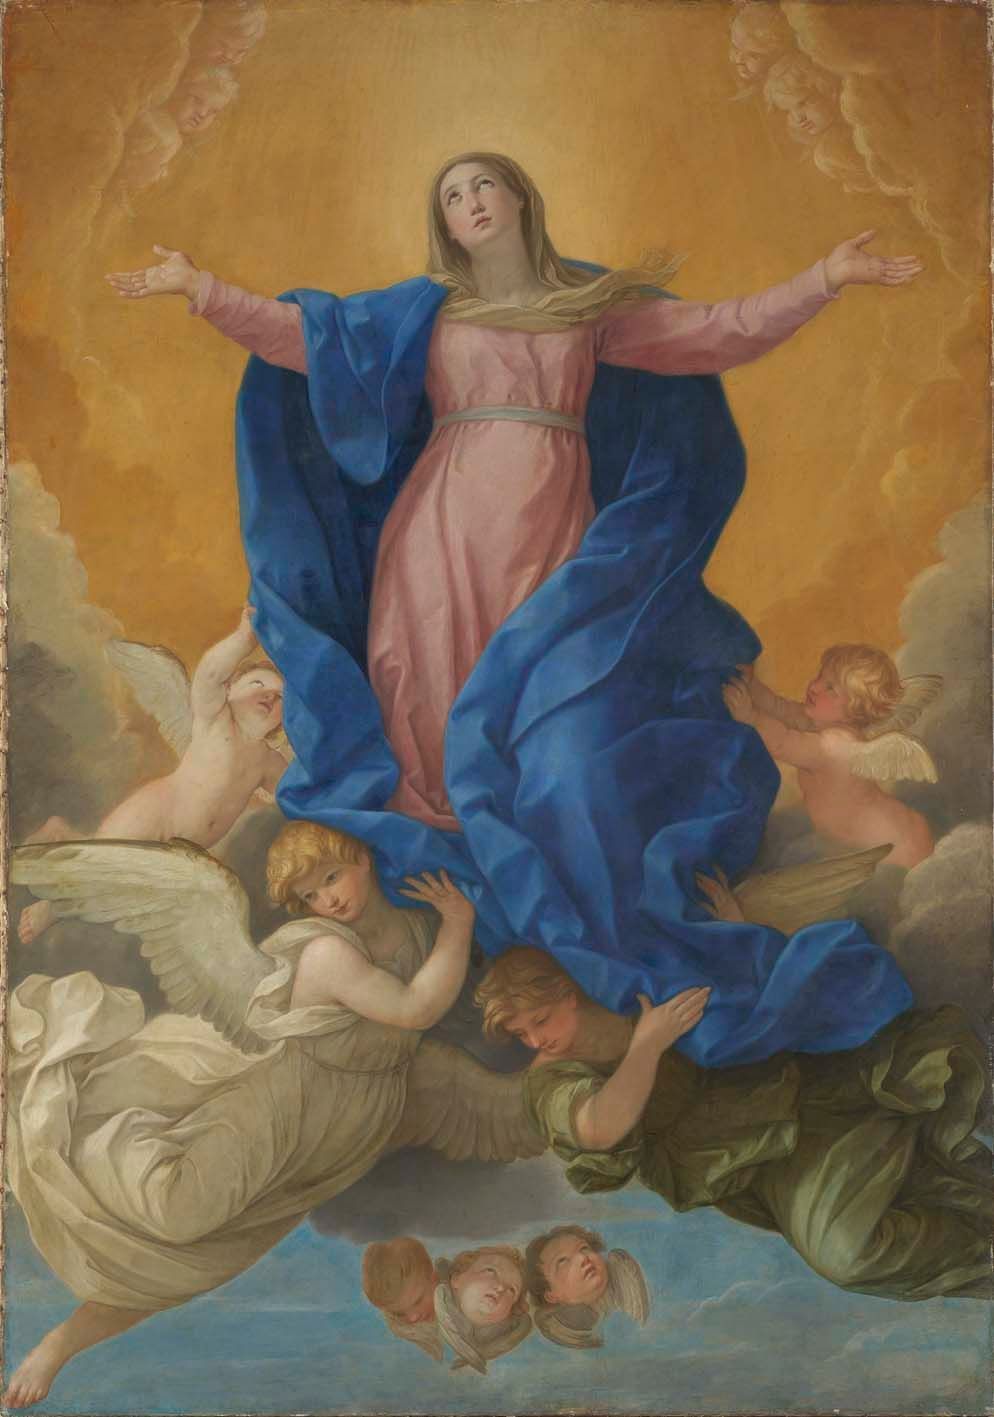 Assumption of the Virgin (1638-1639) by Guido Reni - Public Domain Catholic Painting